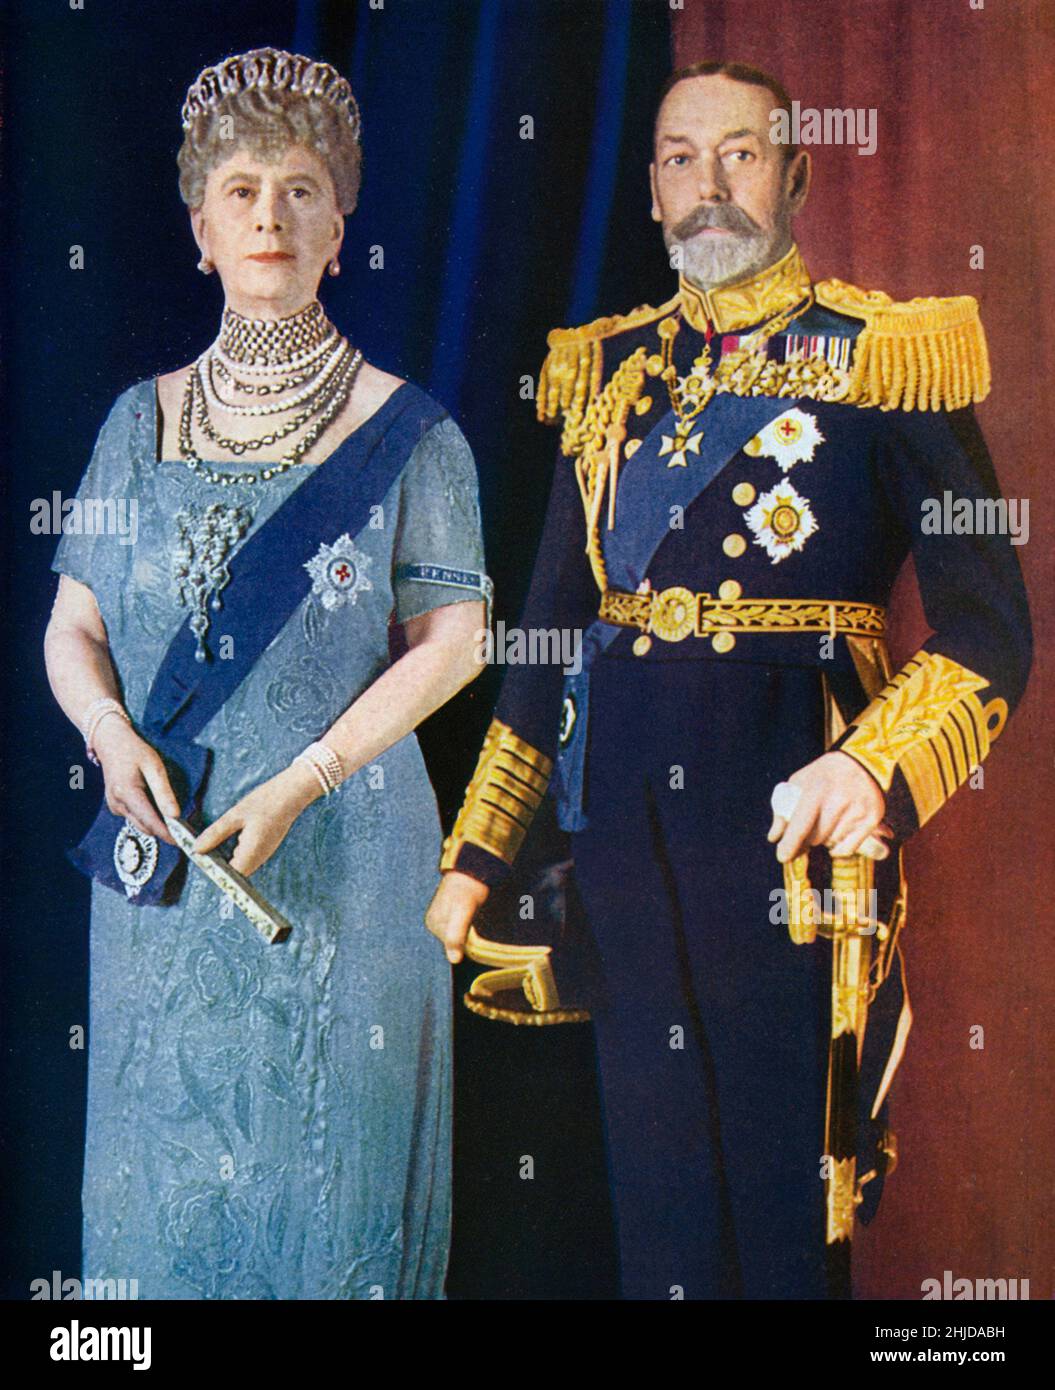 George V. King of the United Kingdom and the British Dominions and Emperor of India, born 3 june 1865 dead 20 january 1936. Pictured with his wife Mary of Teck, 1867-1953. They were married in 1893. Stock Photo